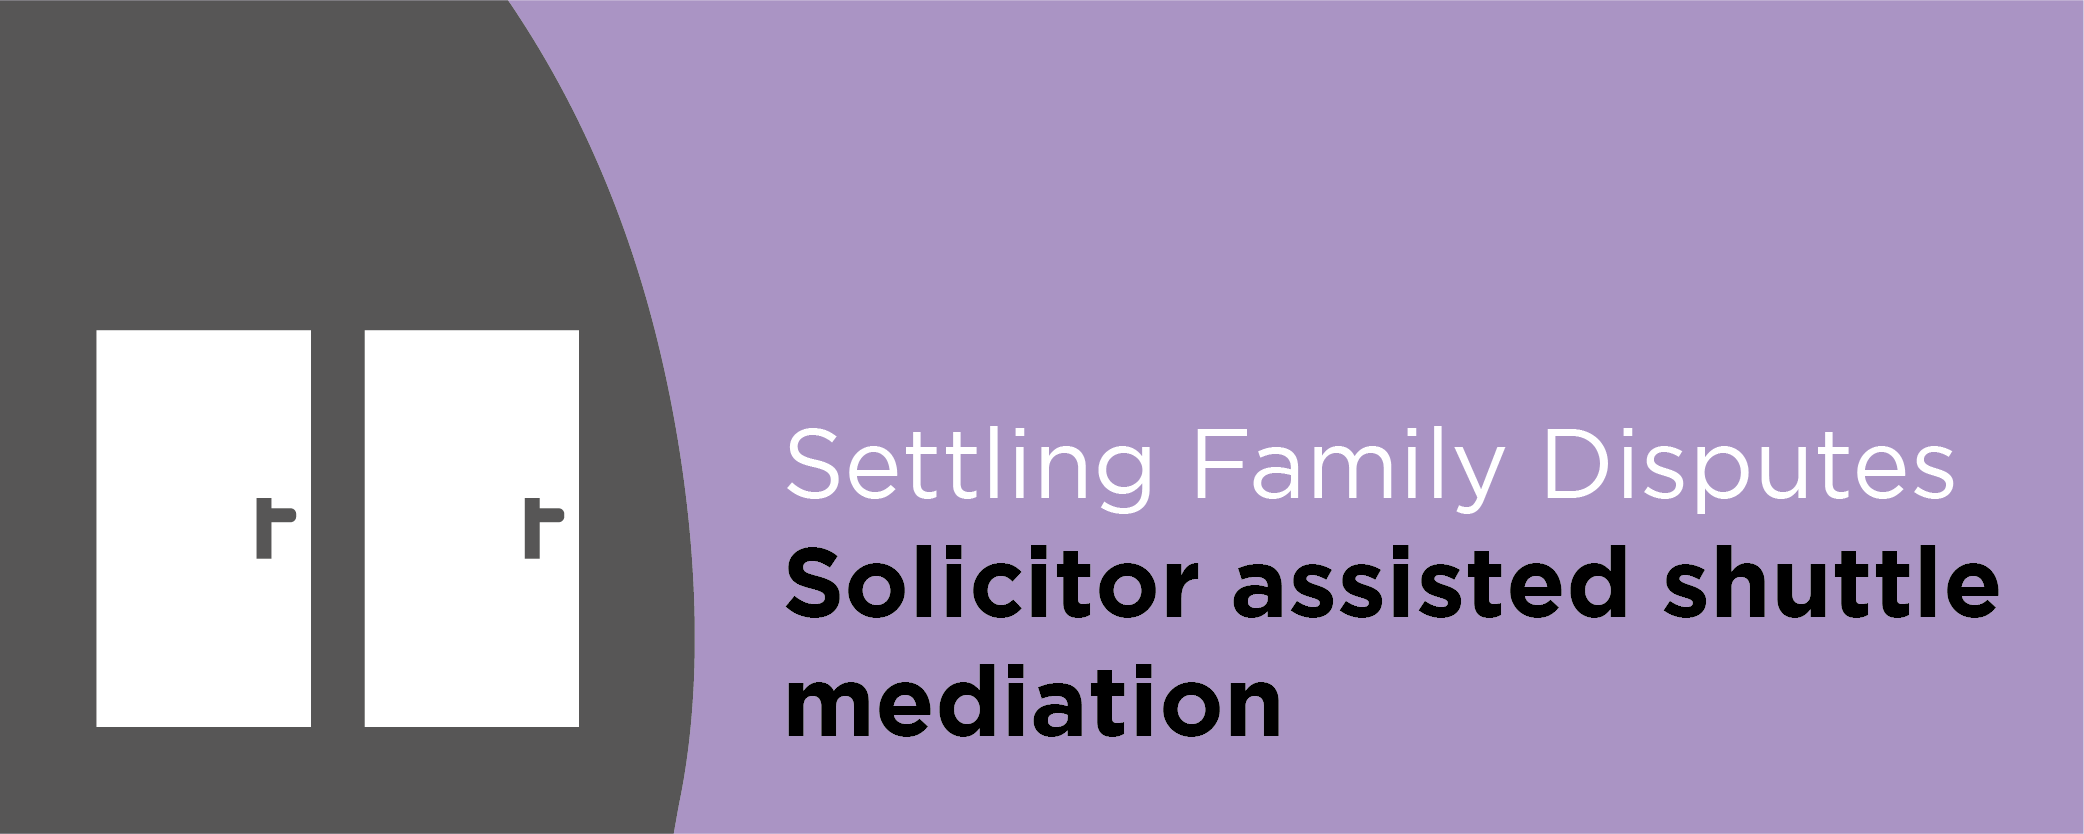 Settling Family Disputes: Solicitor assisted shuttle mediation